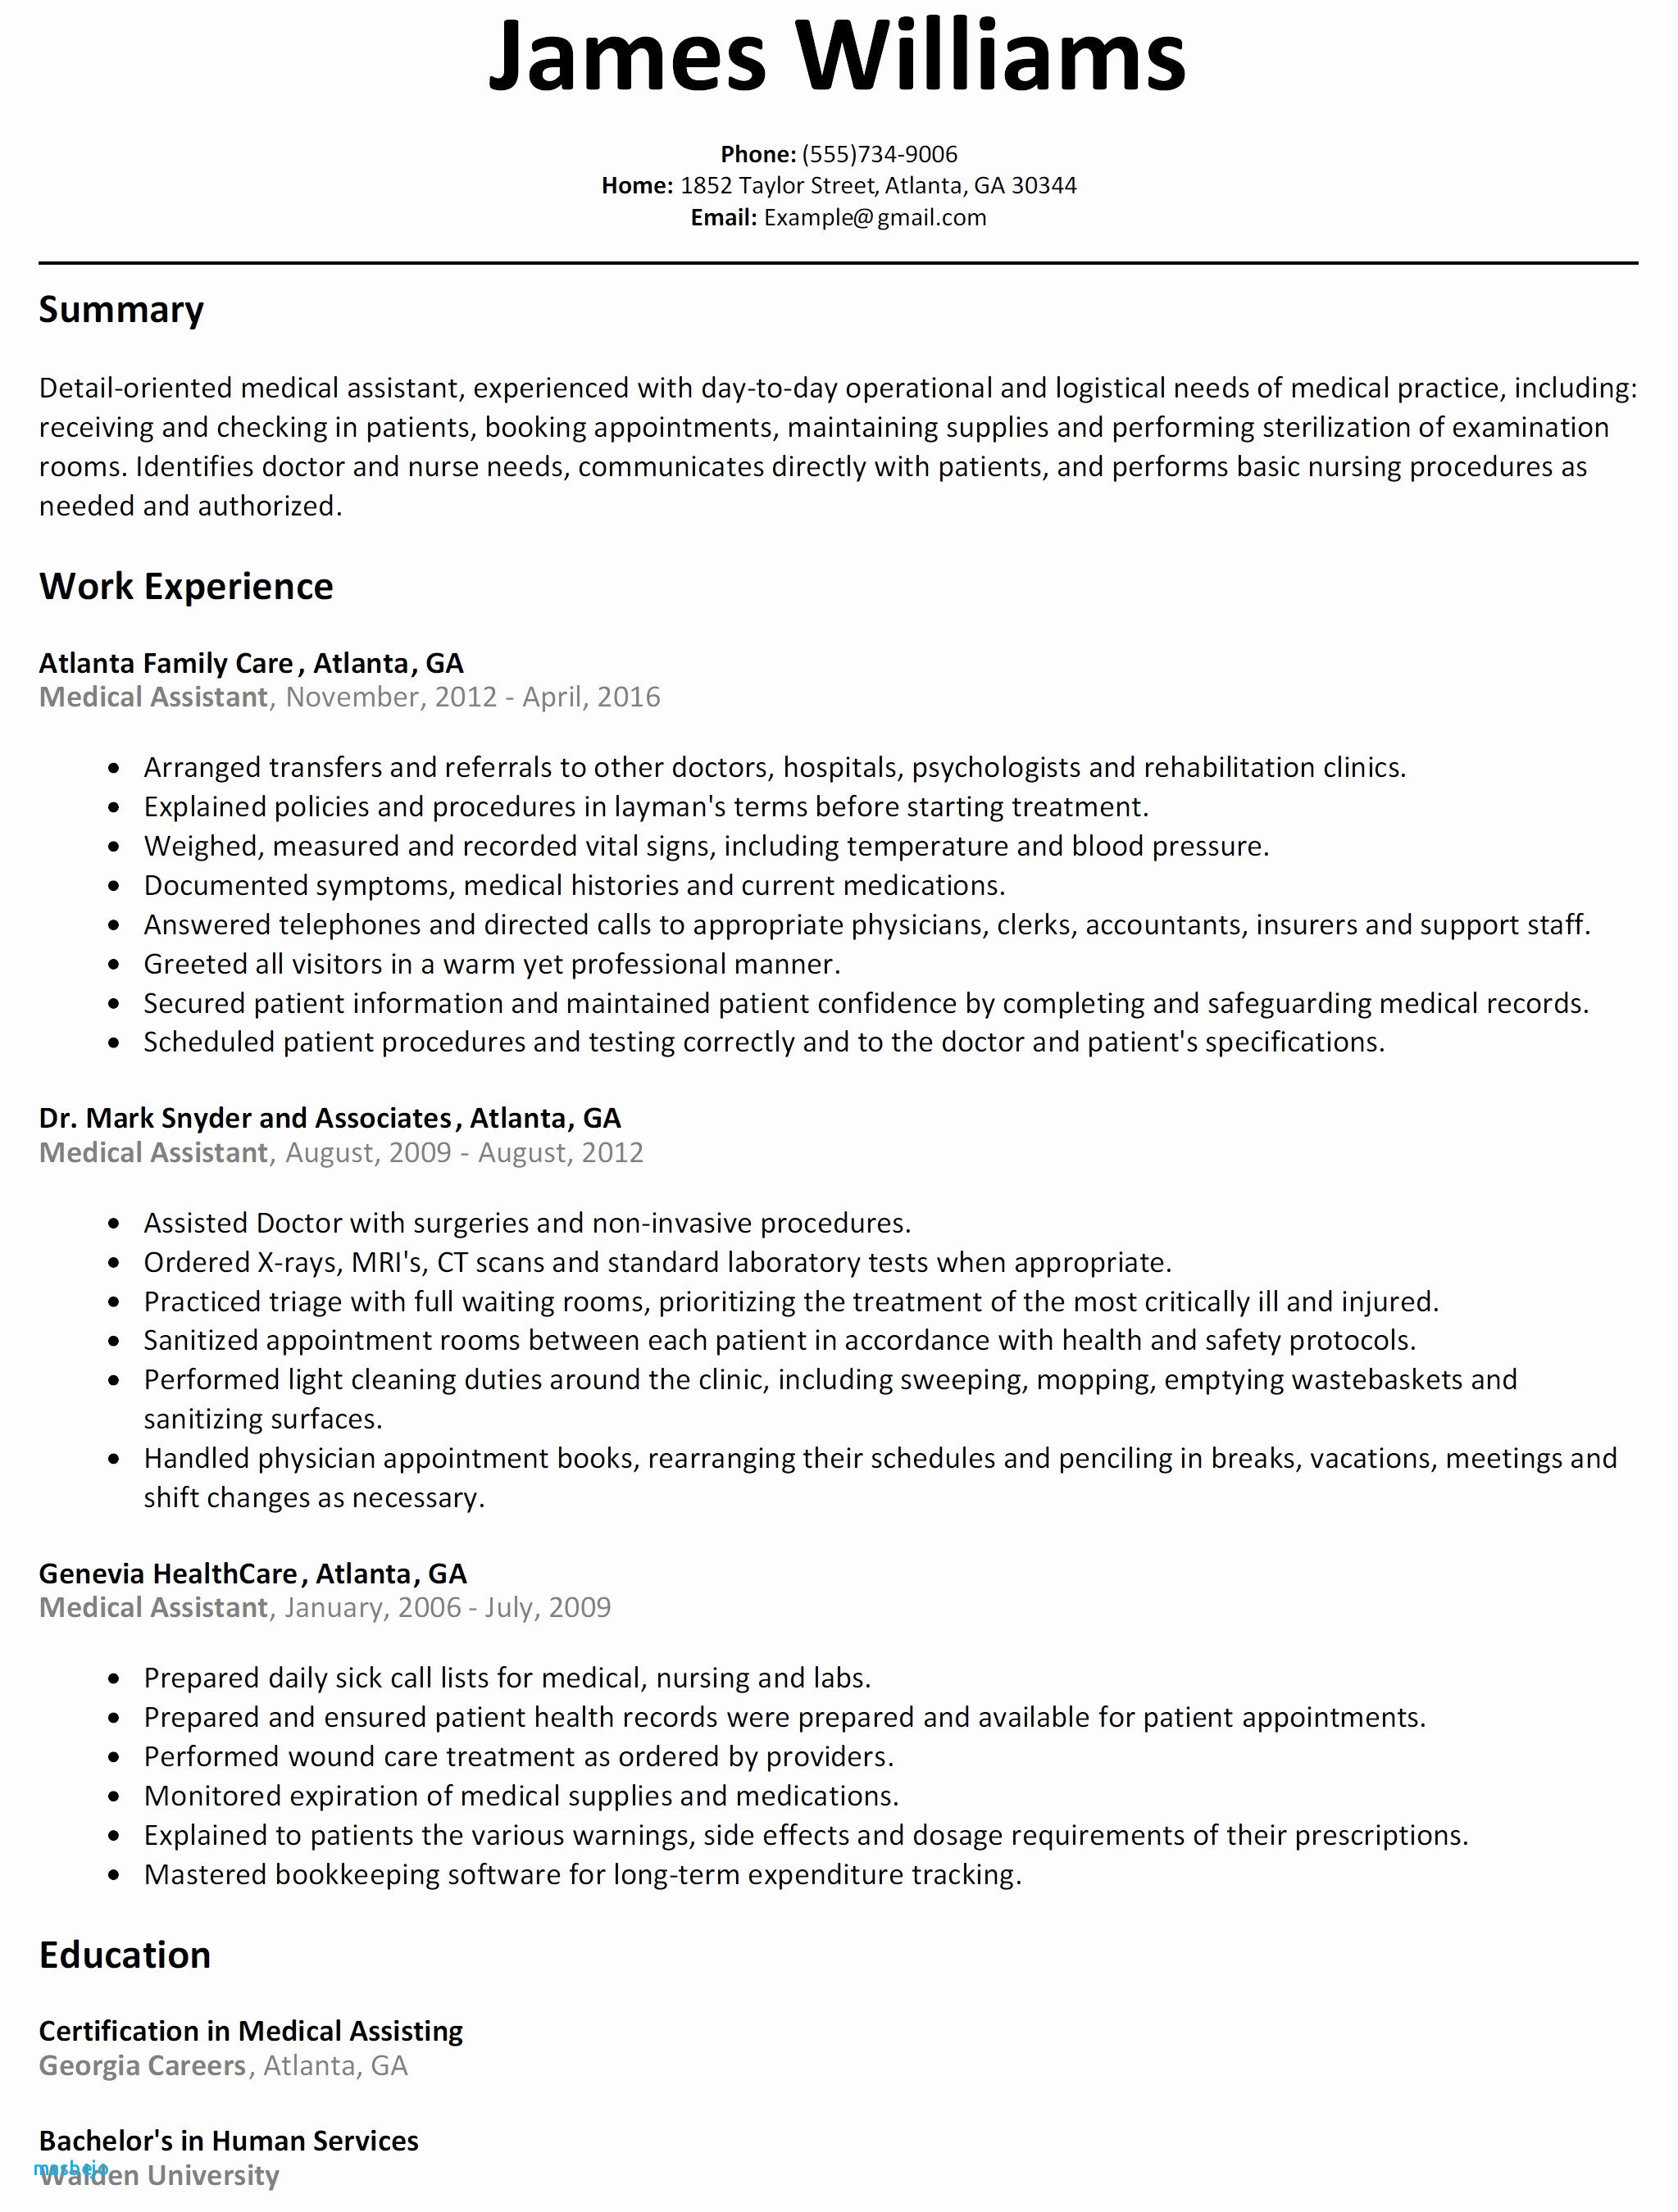 Sales Resume Examples Federal Resume Template Sales Resume Examples Free Resume 16445